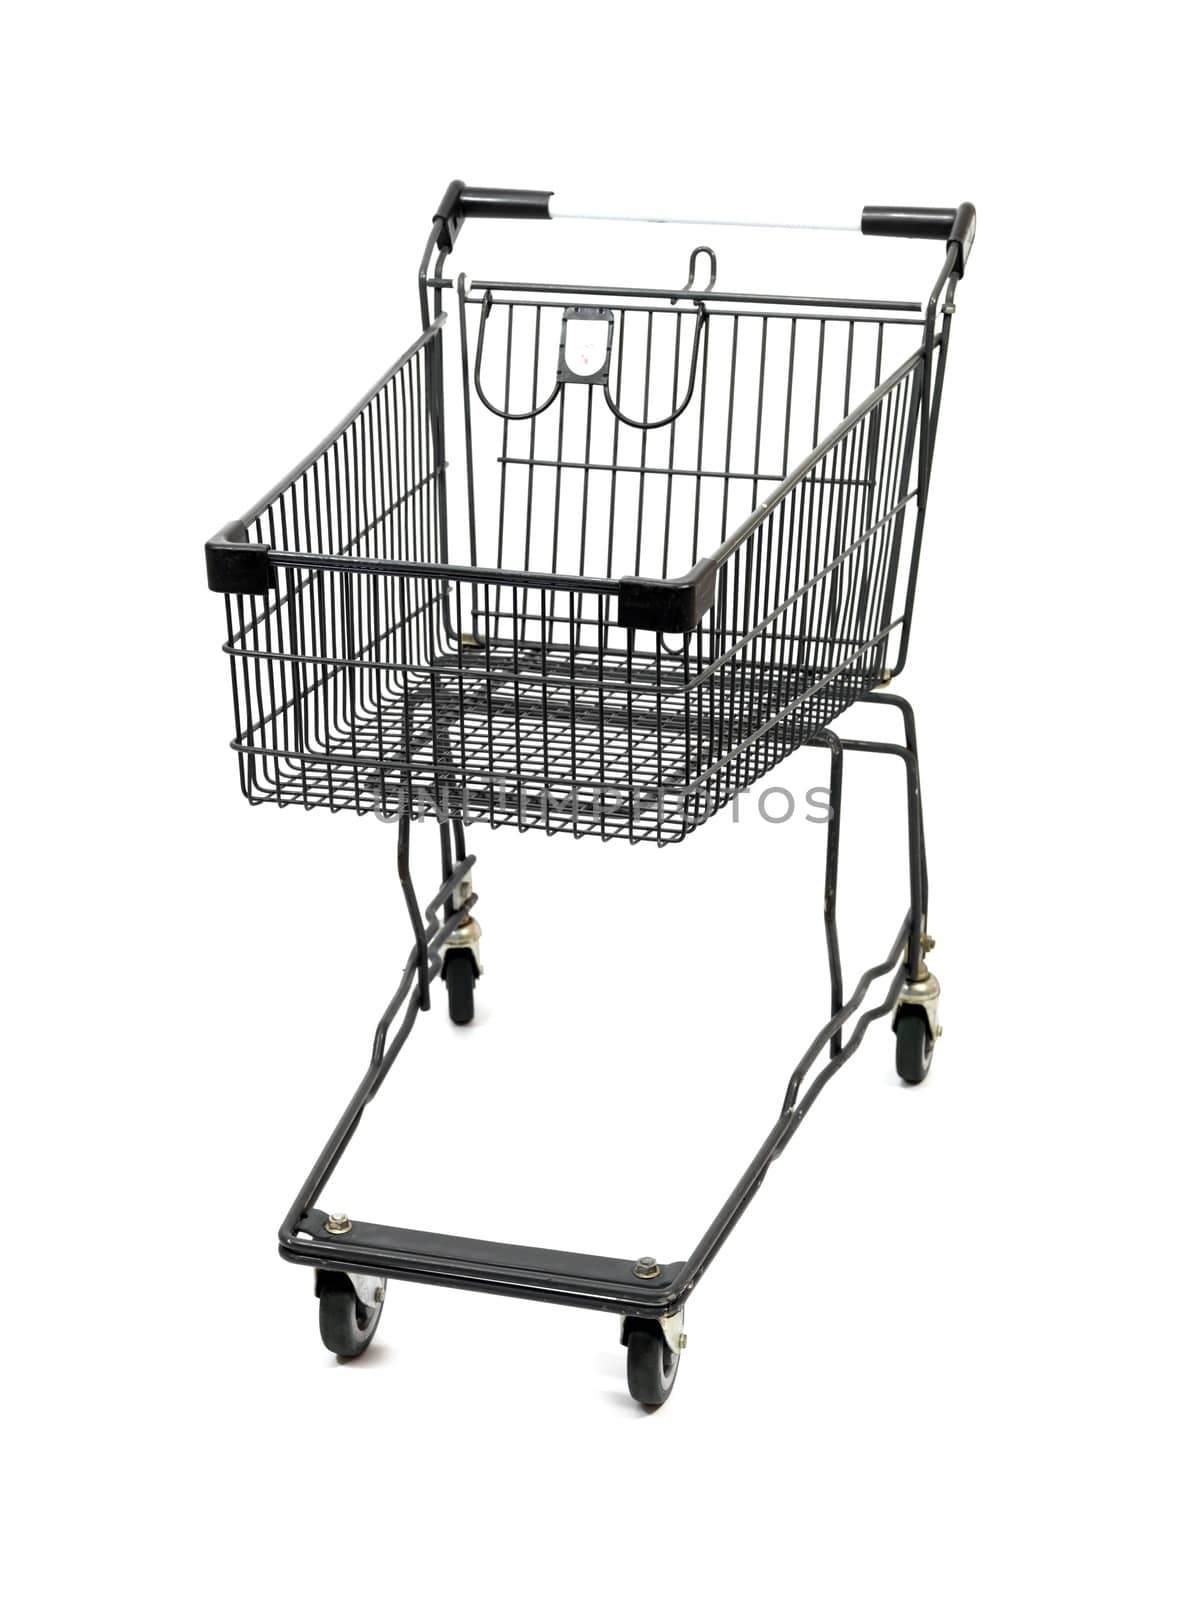 A shopping trolley isolated against a white background